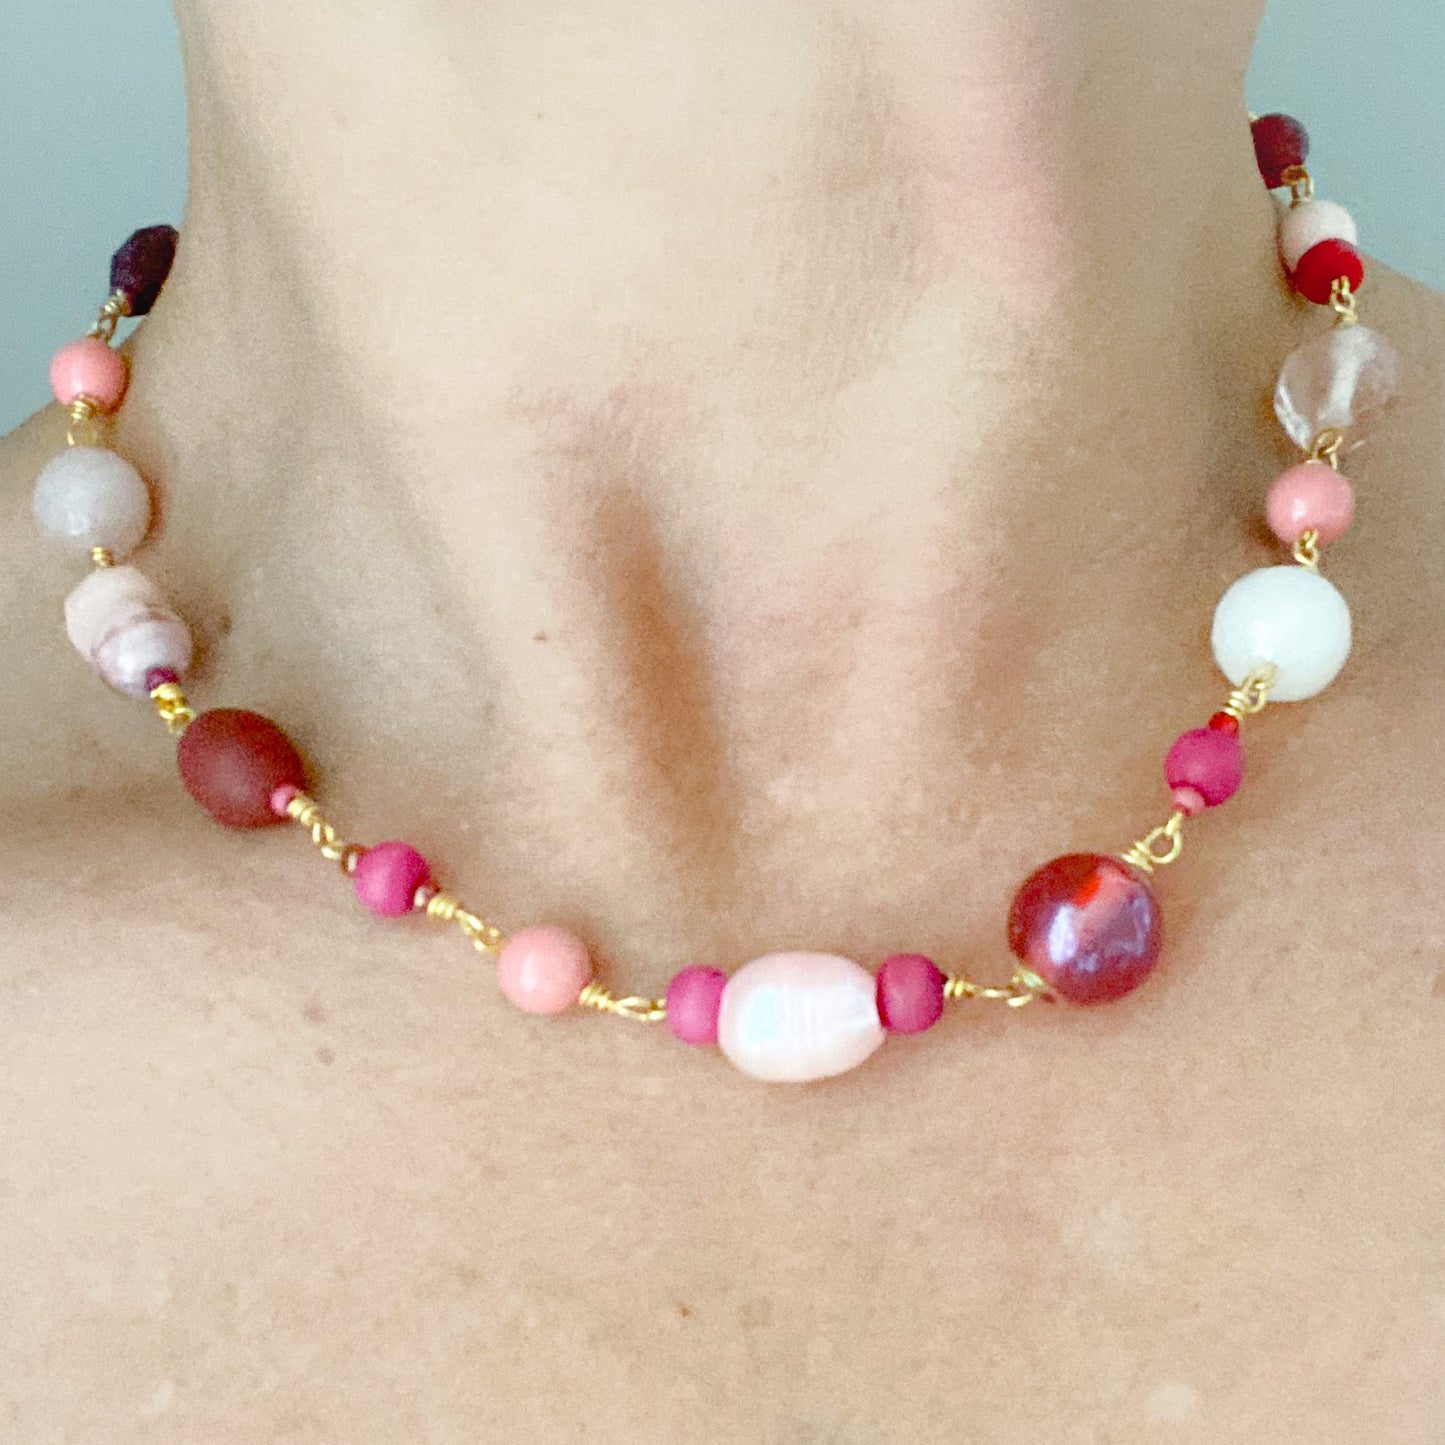 Candy Paint Necklace